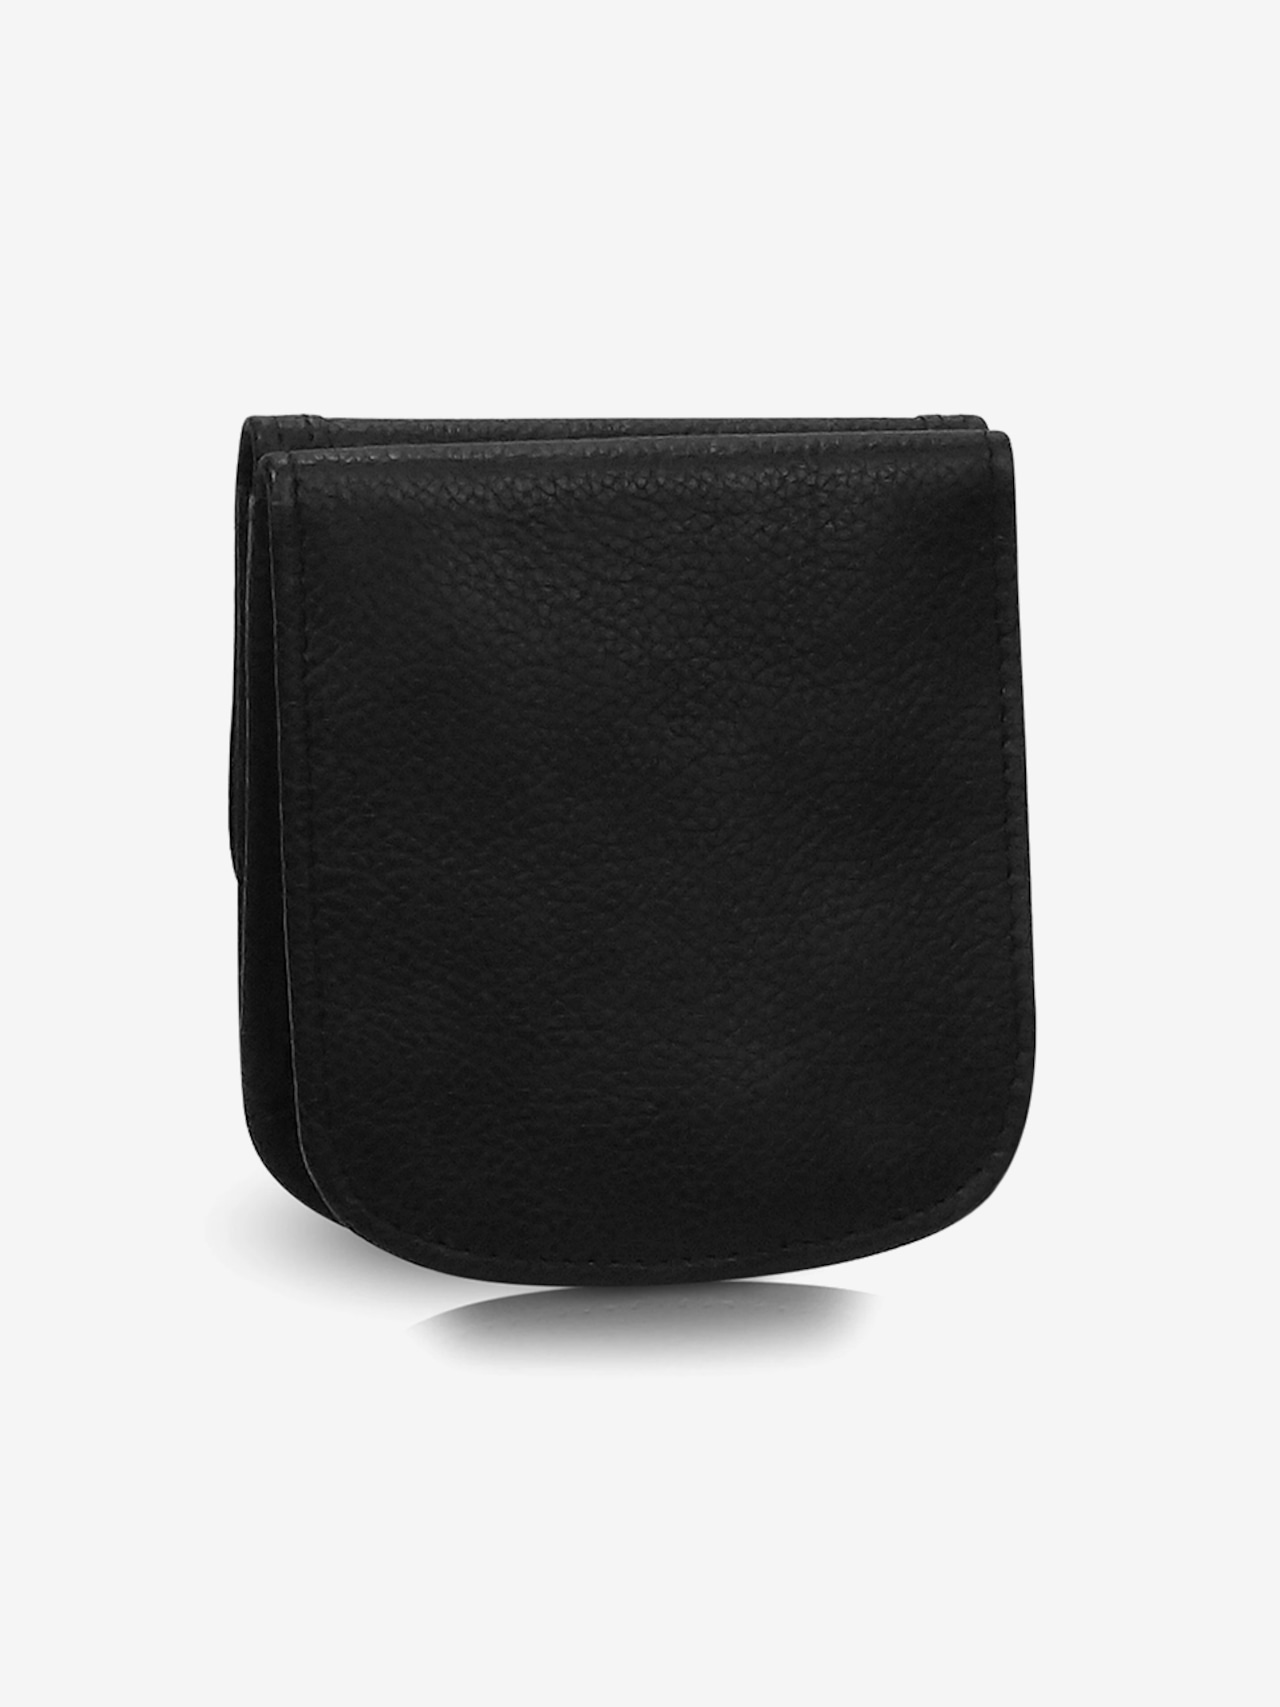 TAXI WALLET「Canyon Black（コンパクト 財布）」